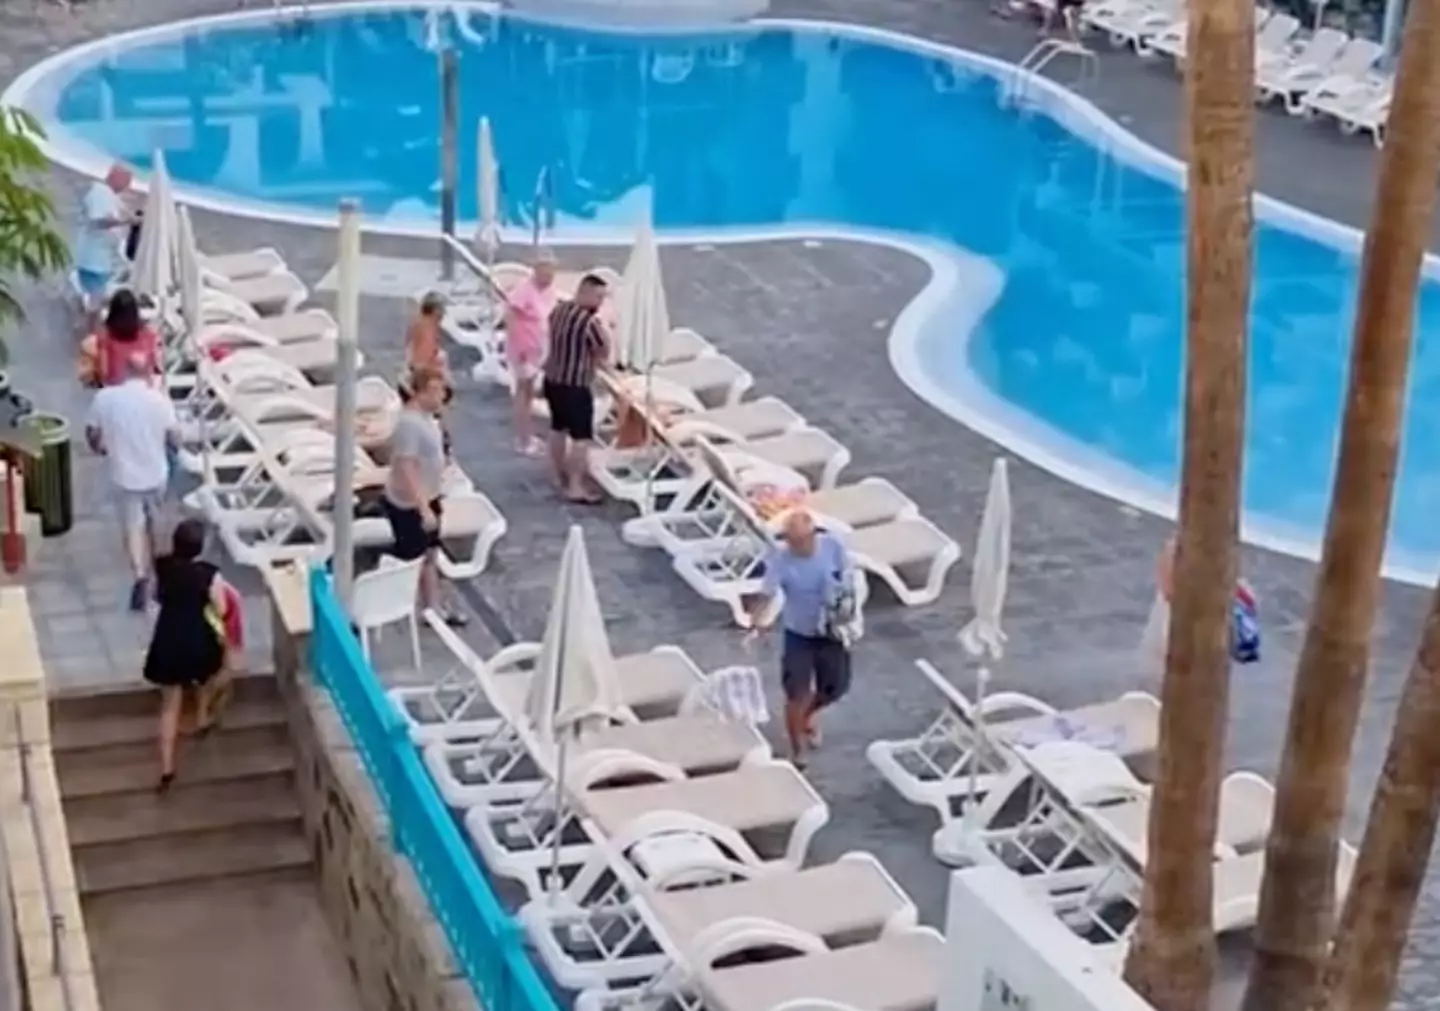 Multiple tourists rushed to put their towels on sunbeds.